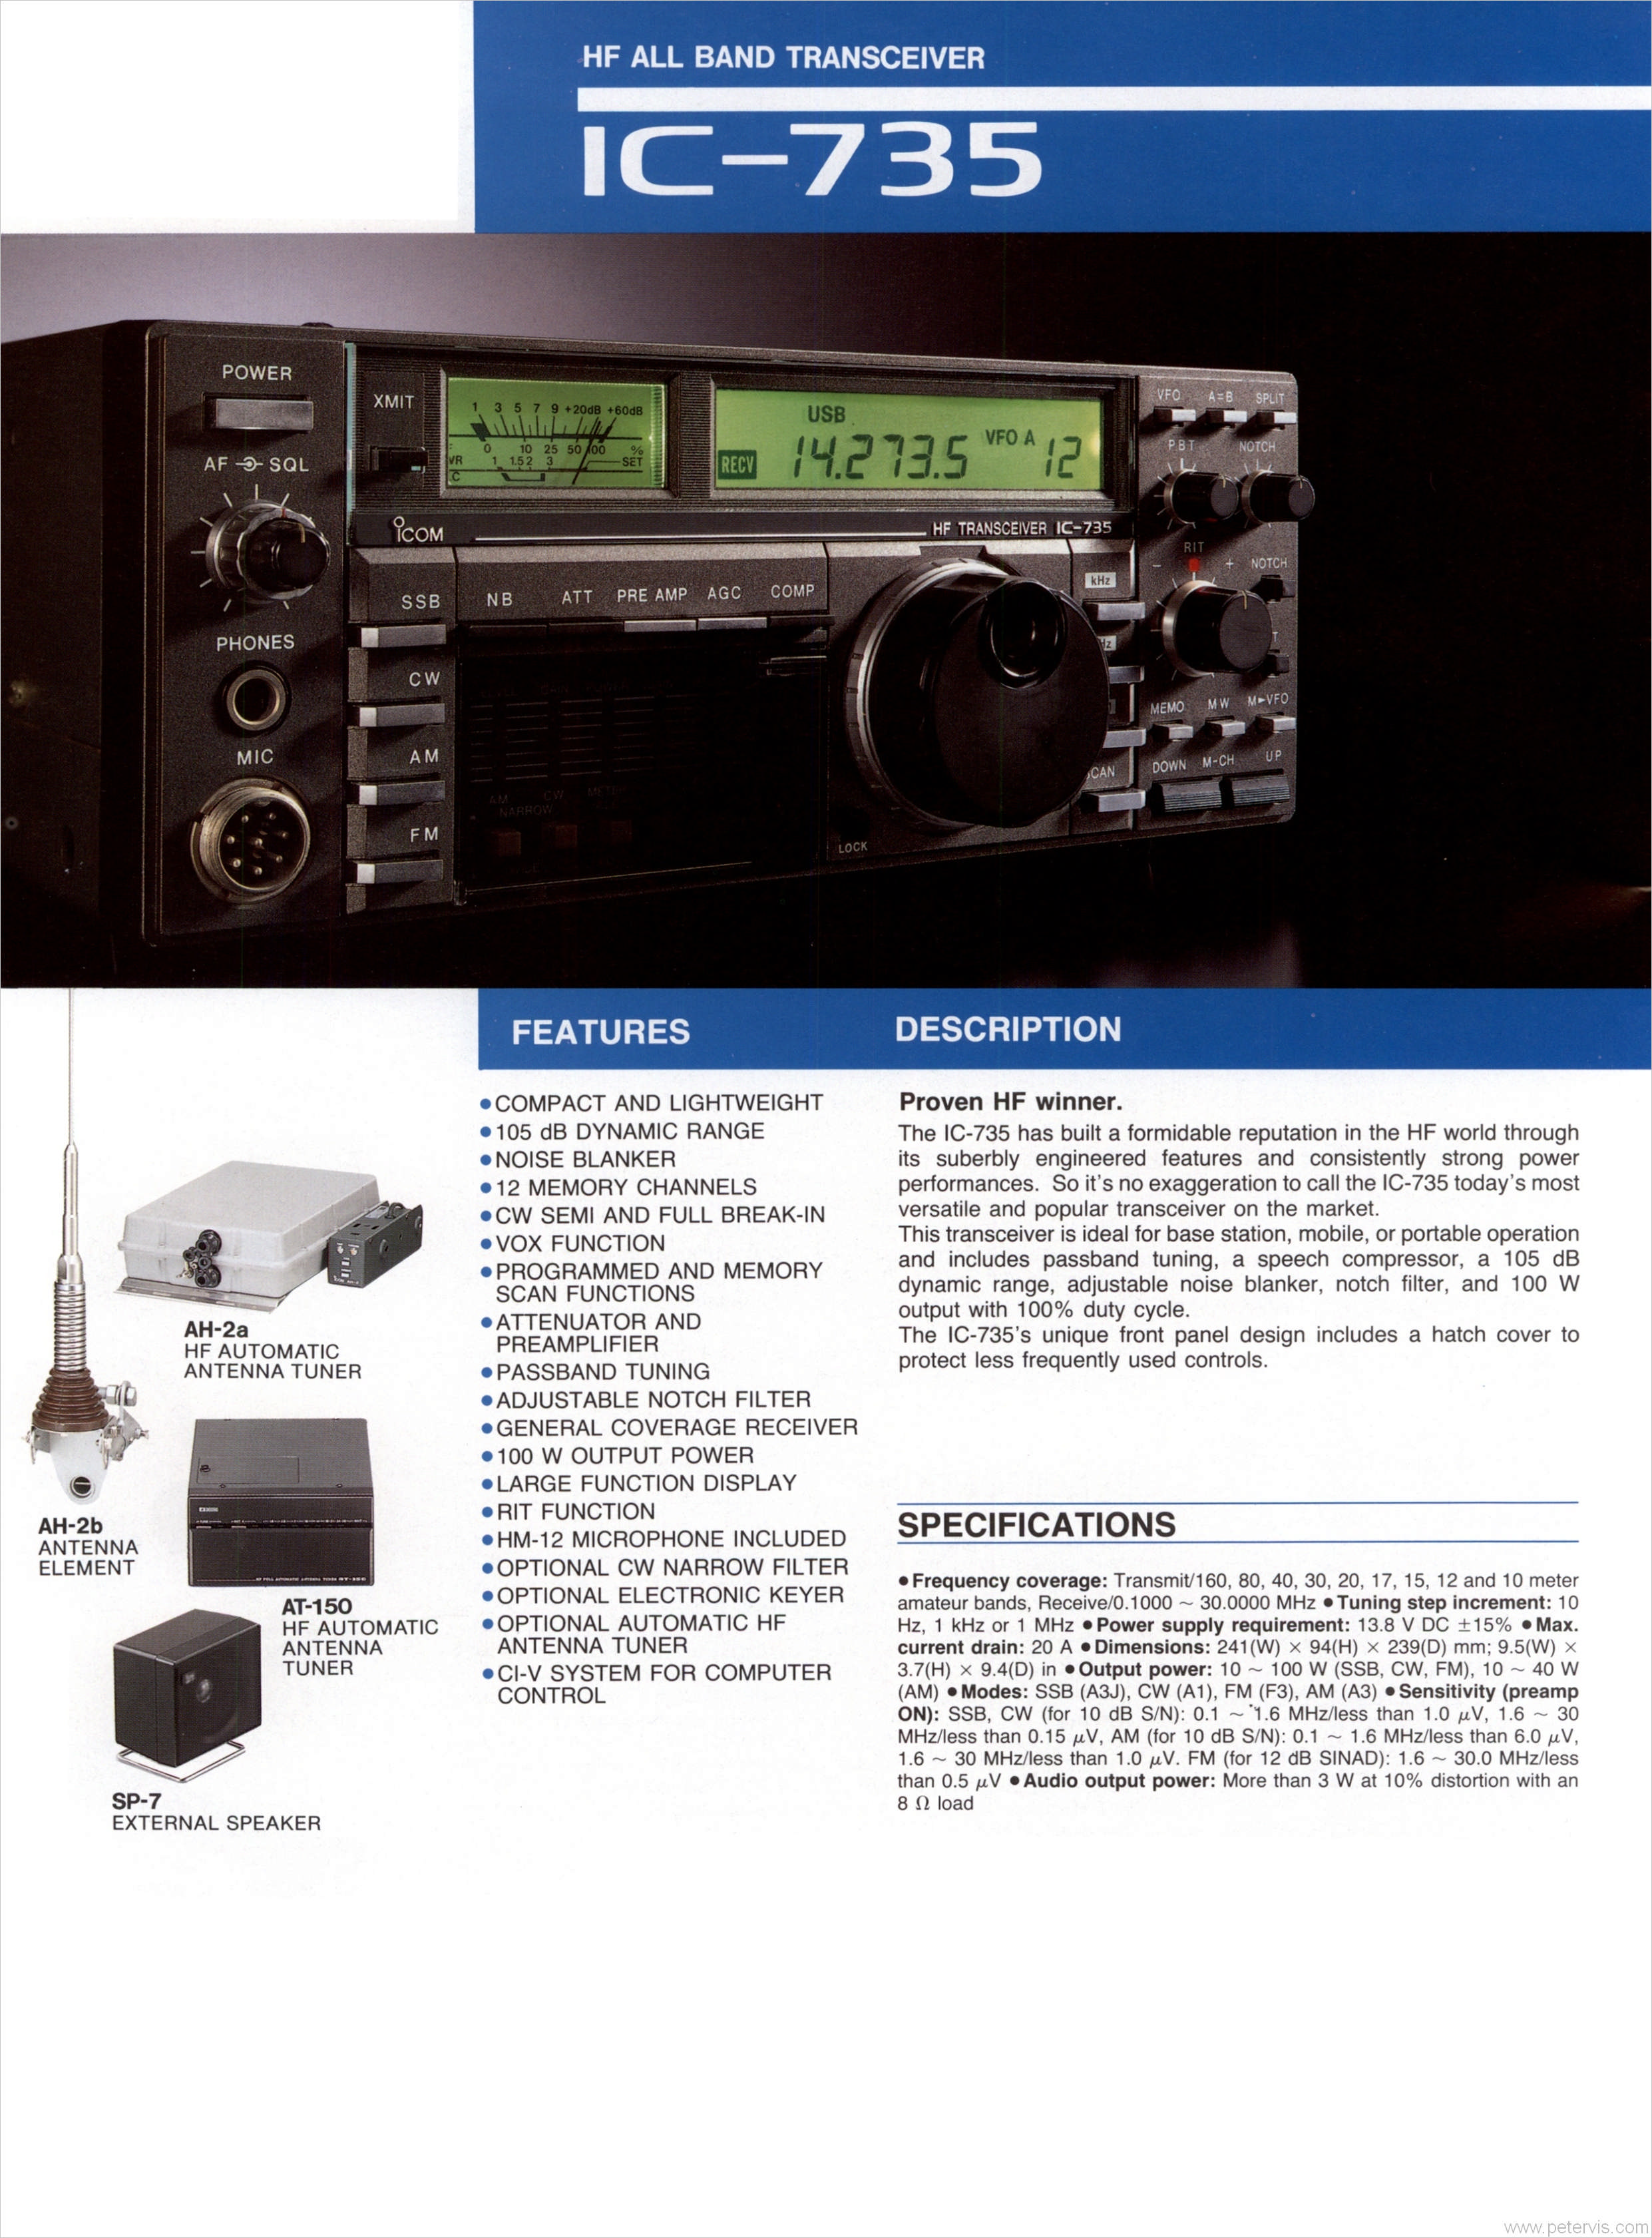 IC-735 SPECIFICATION and FEATURES